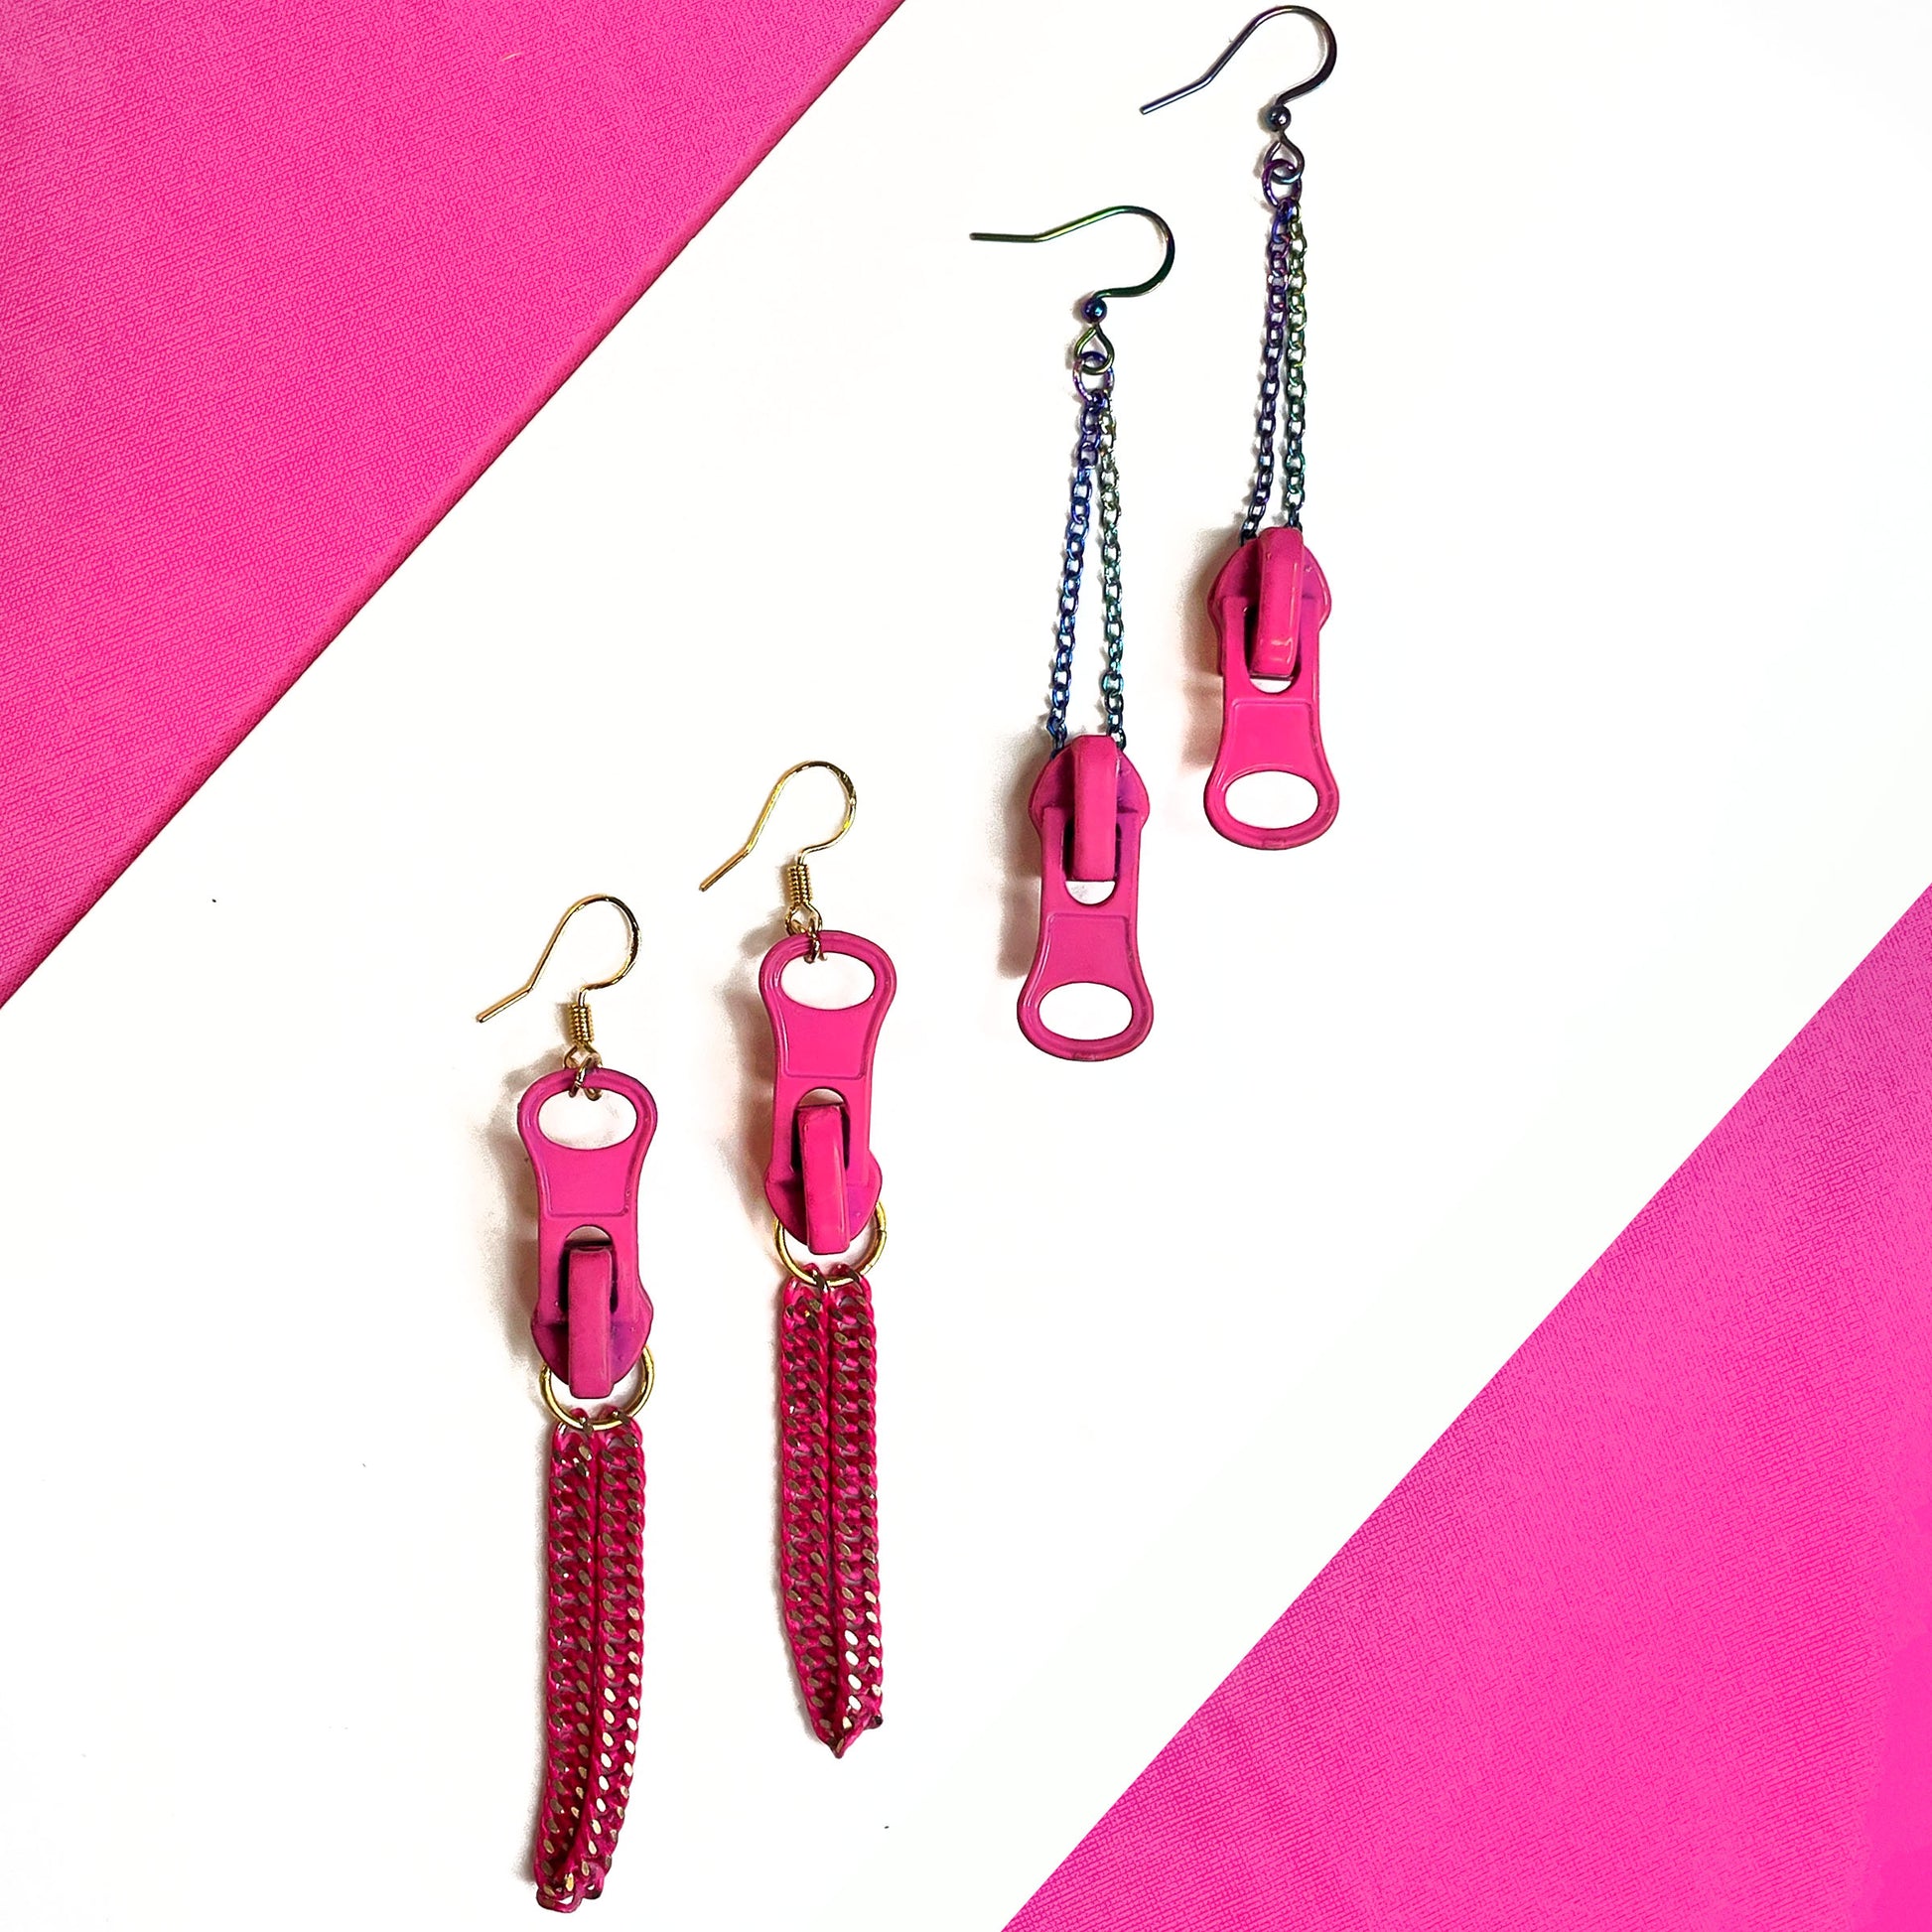 she-bang is upcycled handmade unique pink zipper earrings, unique jewelry, made from recycled materials and chains, completely one of a kind jewelry made by local brooklyn designers.